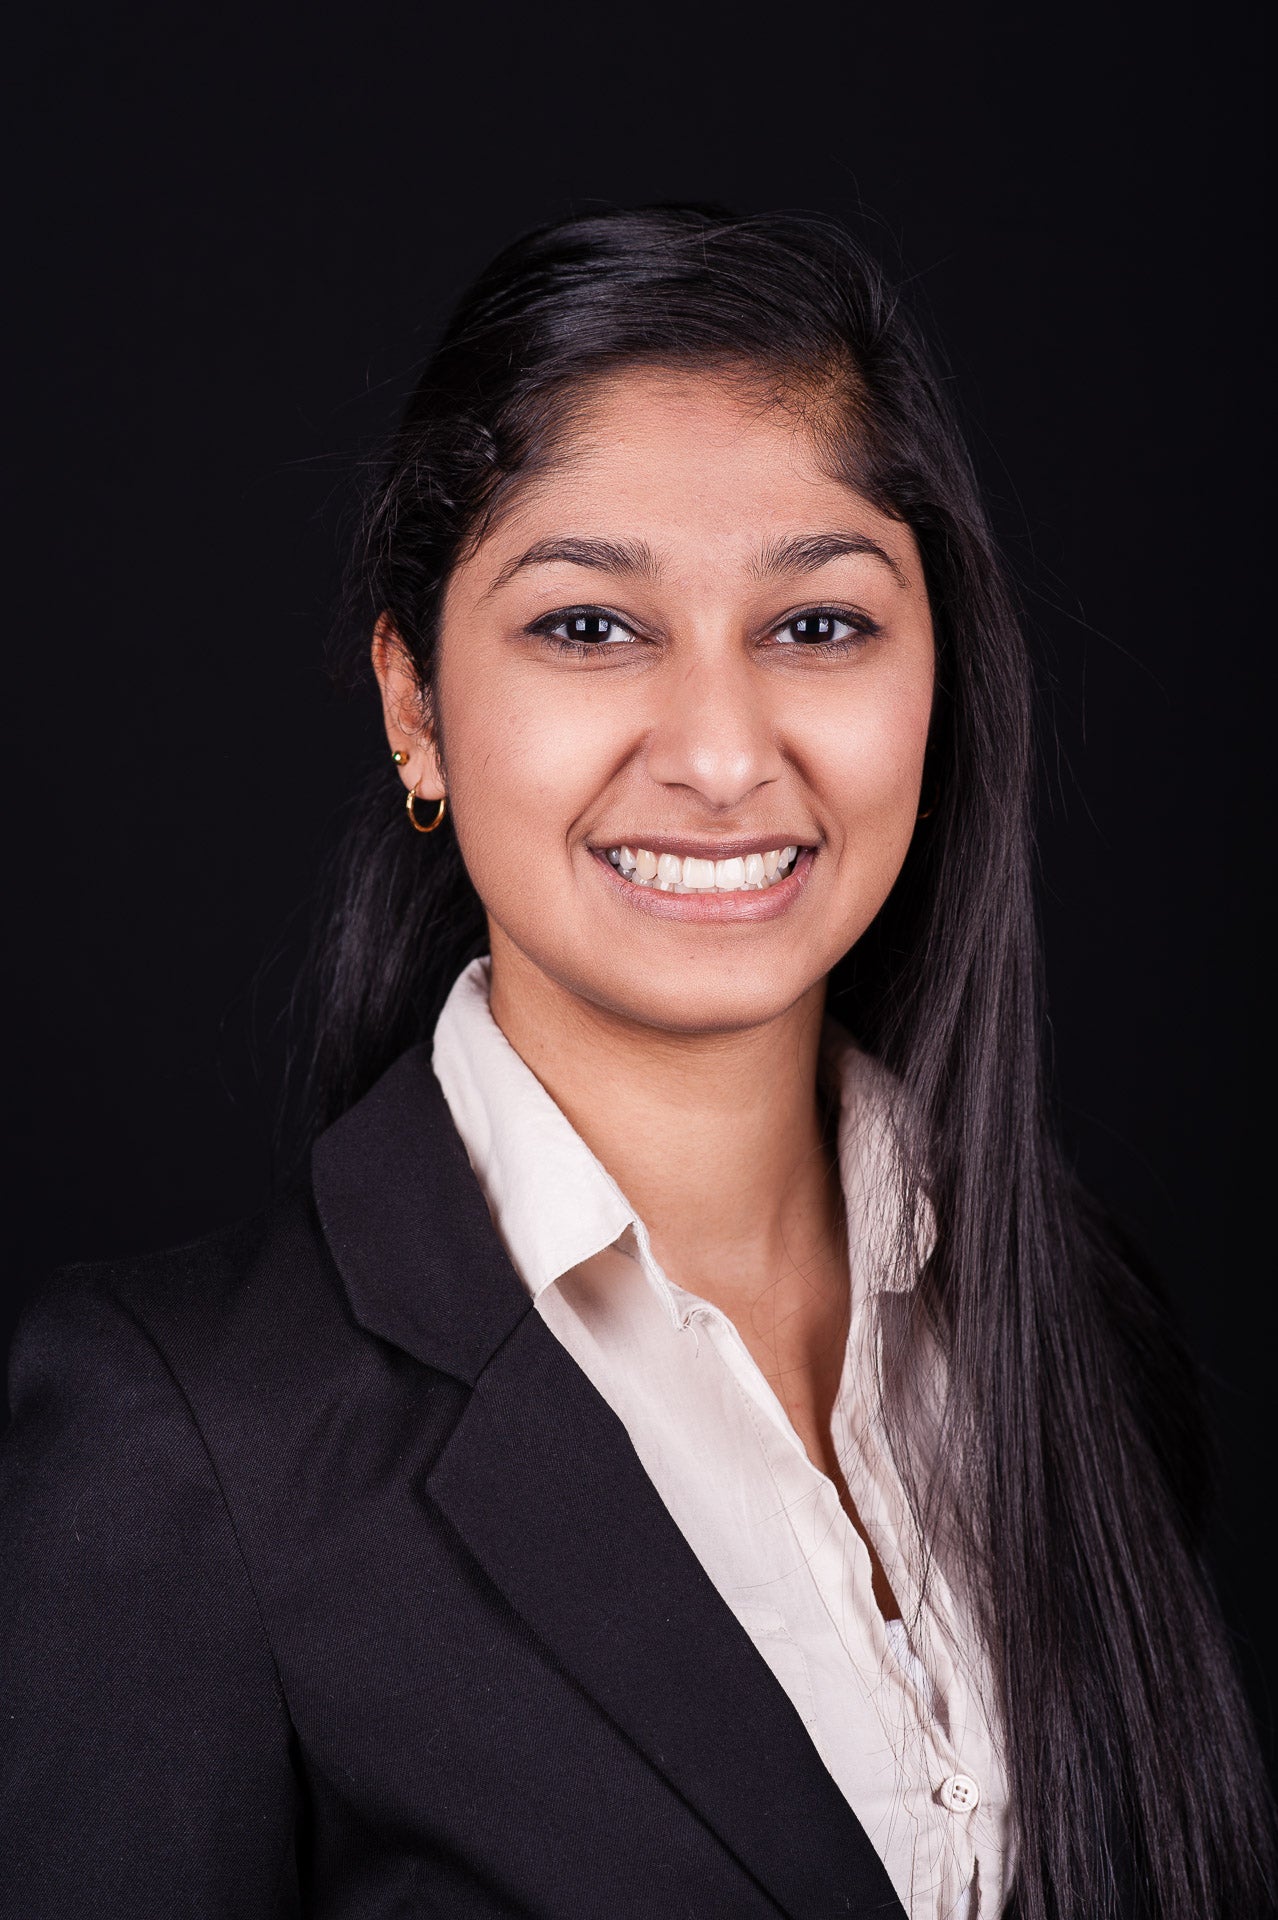 Former group member and Co-Terminal Master's student Ferheen Qureshi